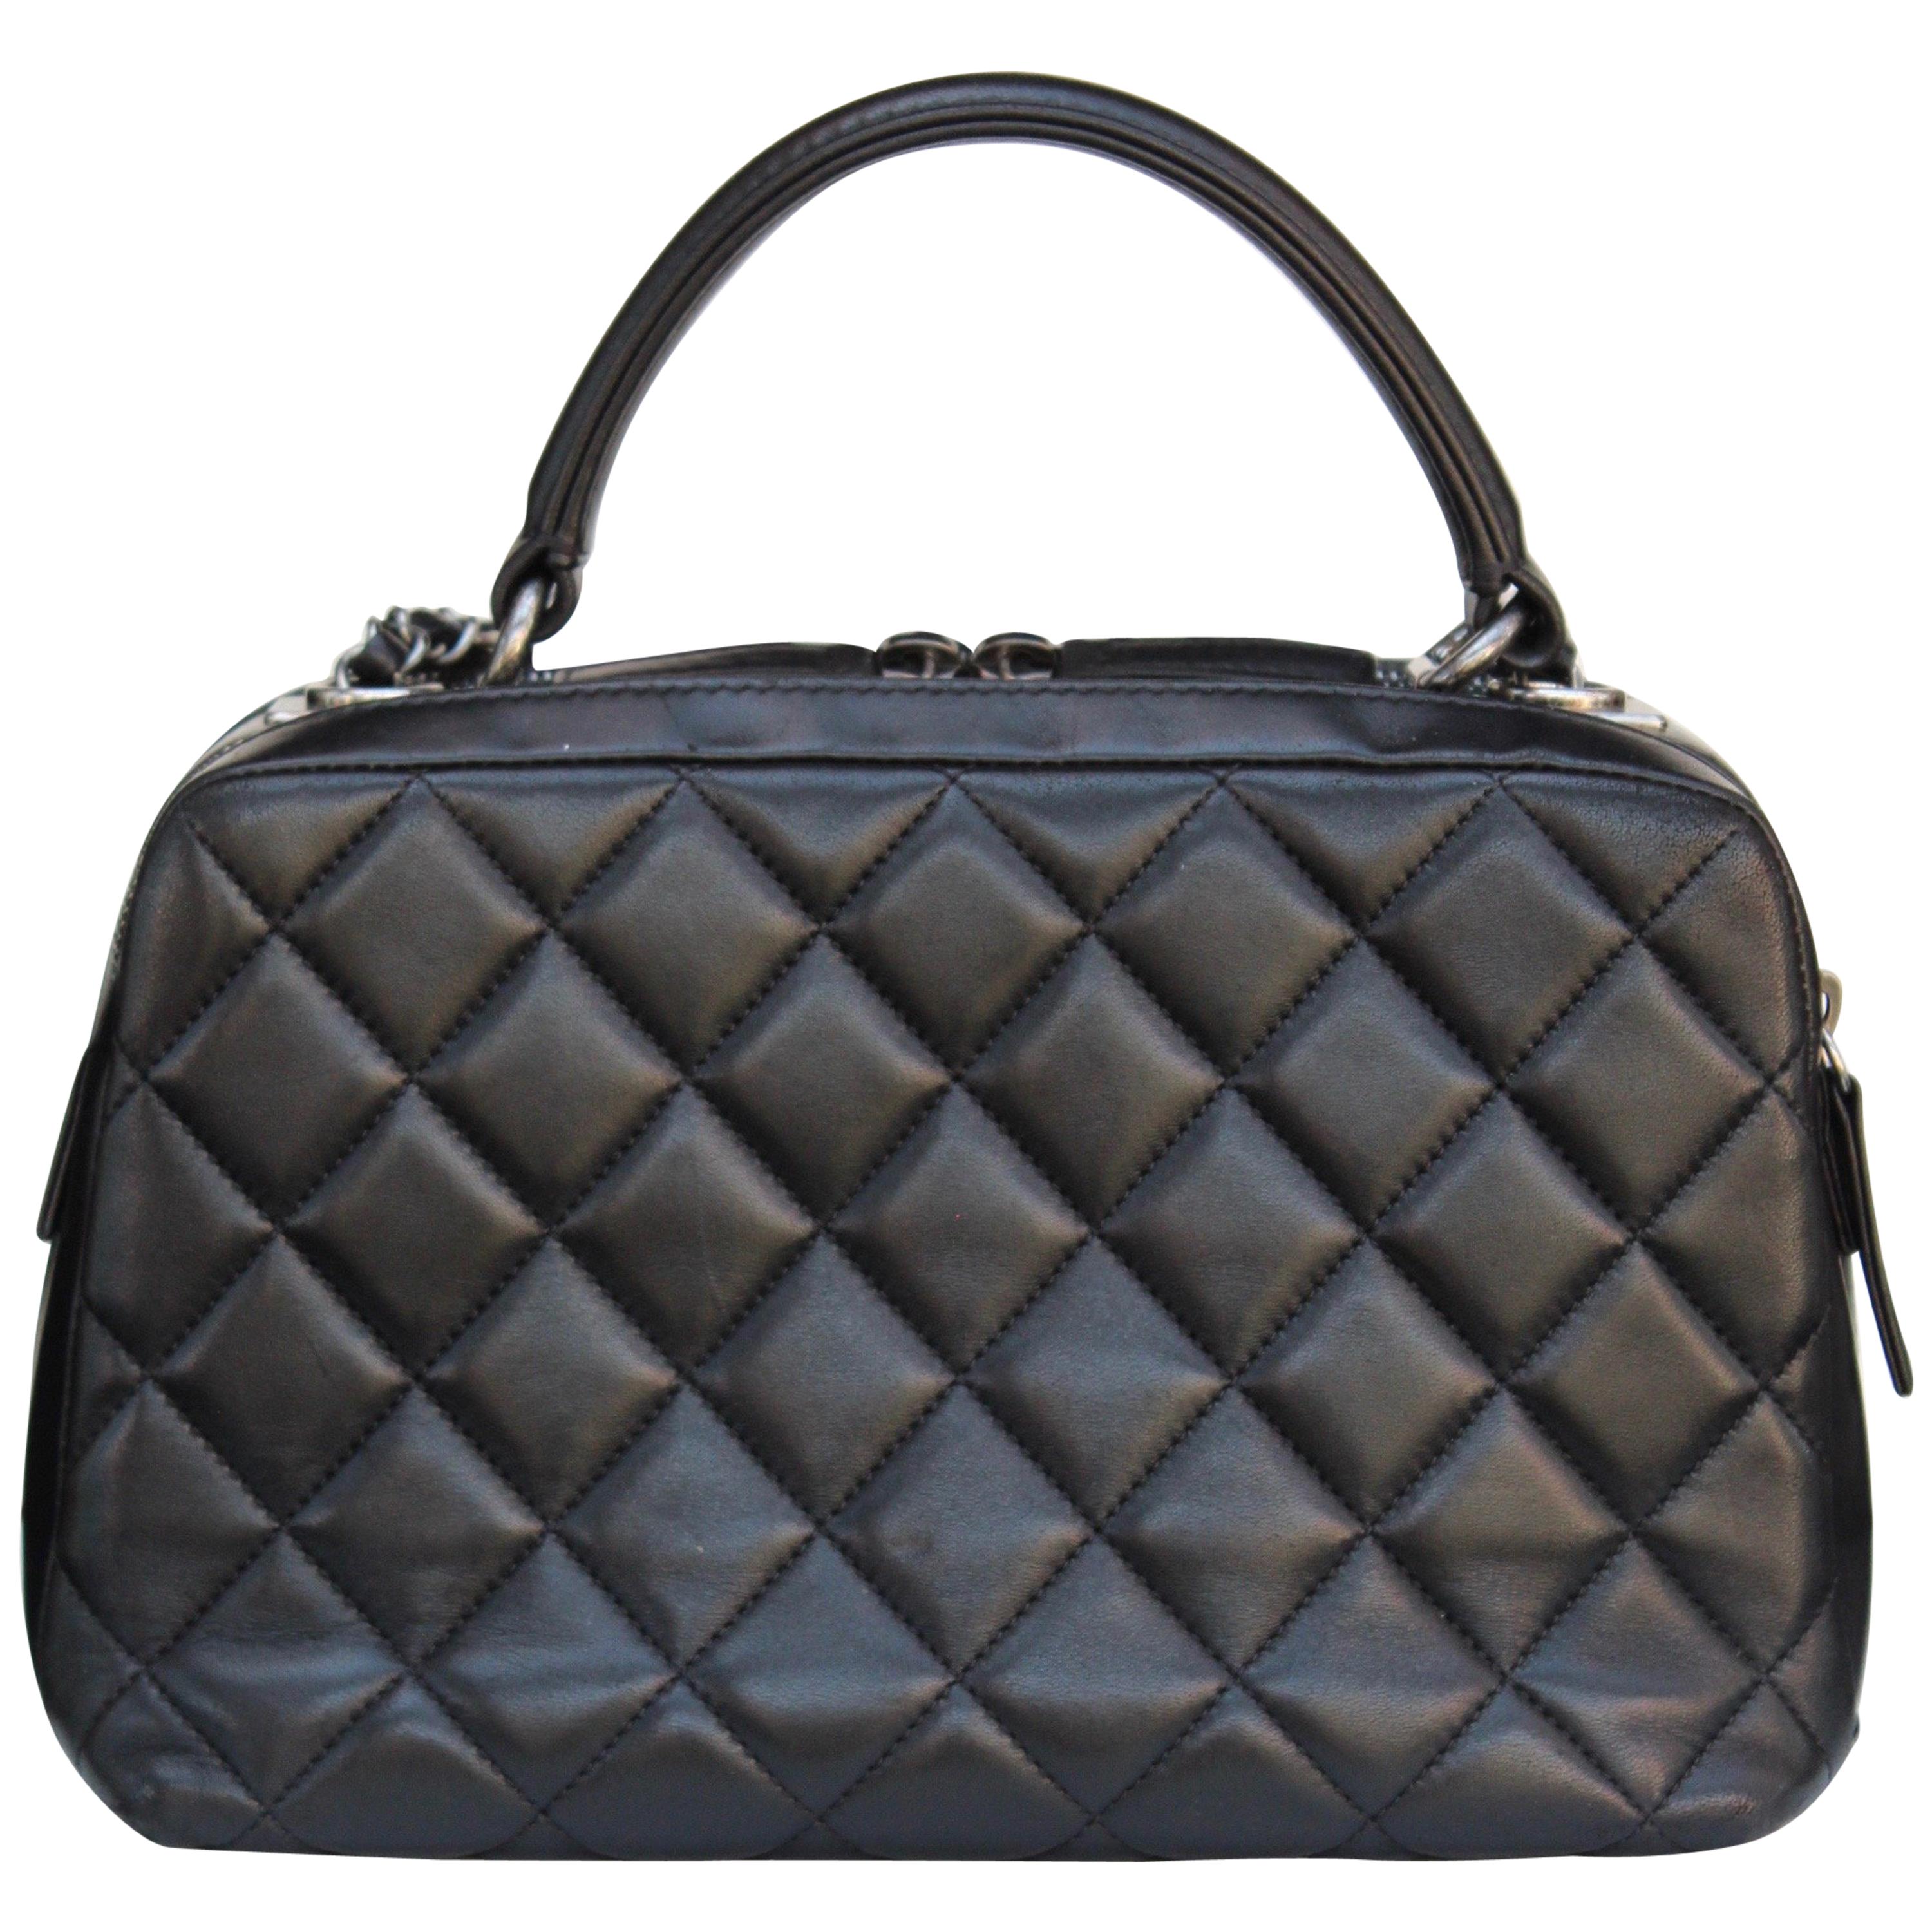 Chanel lovely black quilted bowling bag, 2010s im Angebot